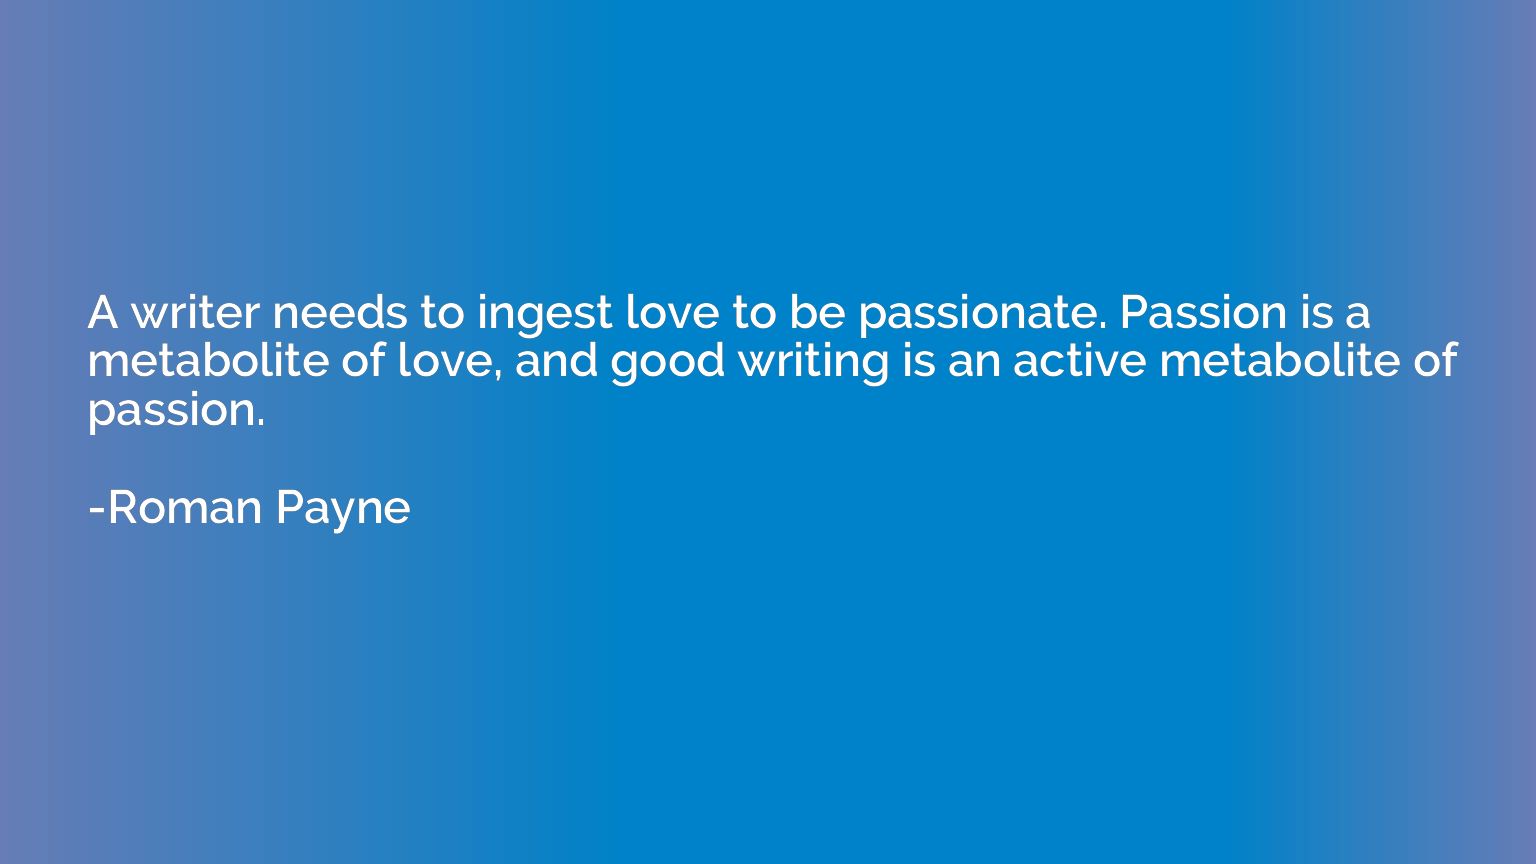 A writer needs to ingest love to be passionate. Passion is a